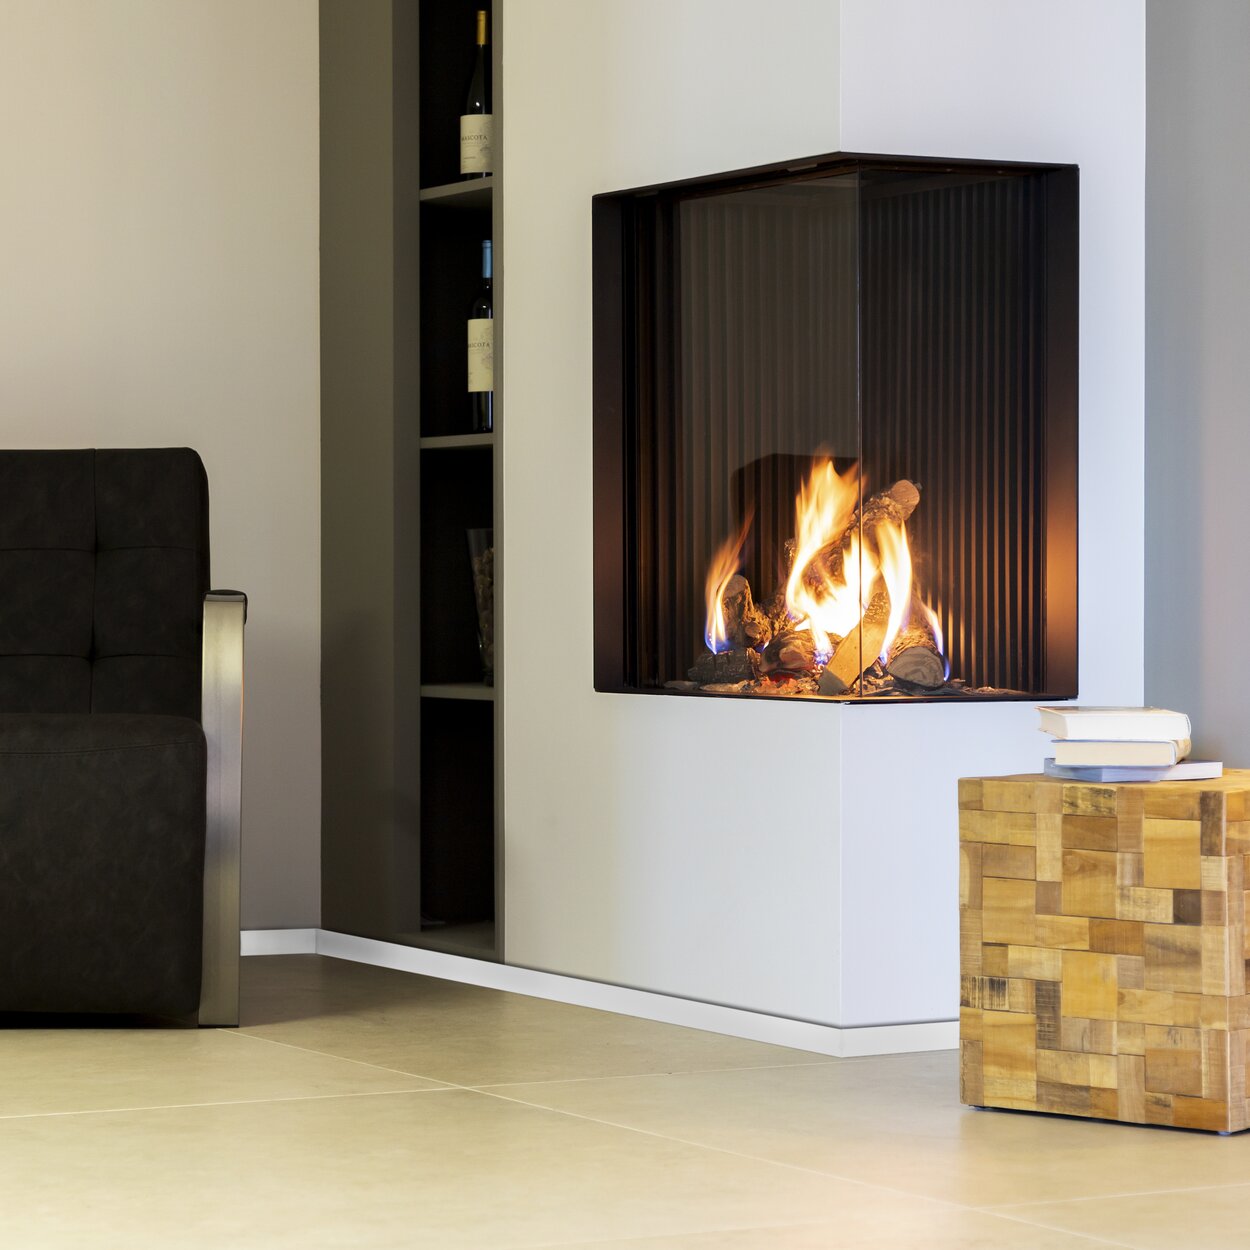 Corner variant gas fireplace GP65/75C with white panelling in the living room with shelf and armchair